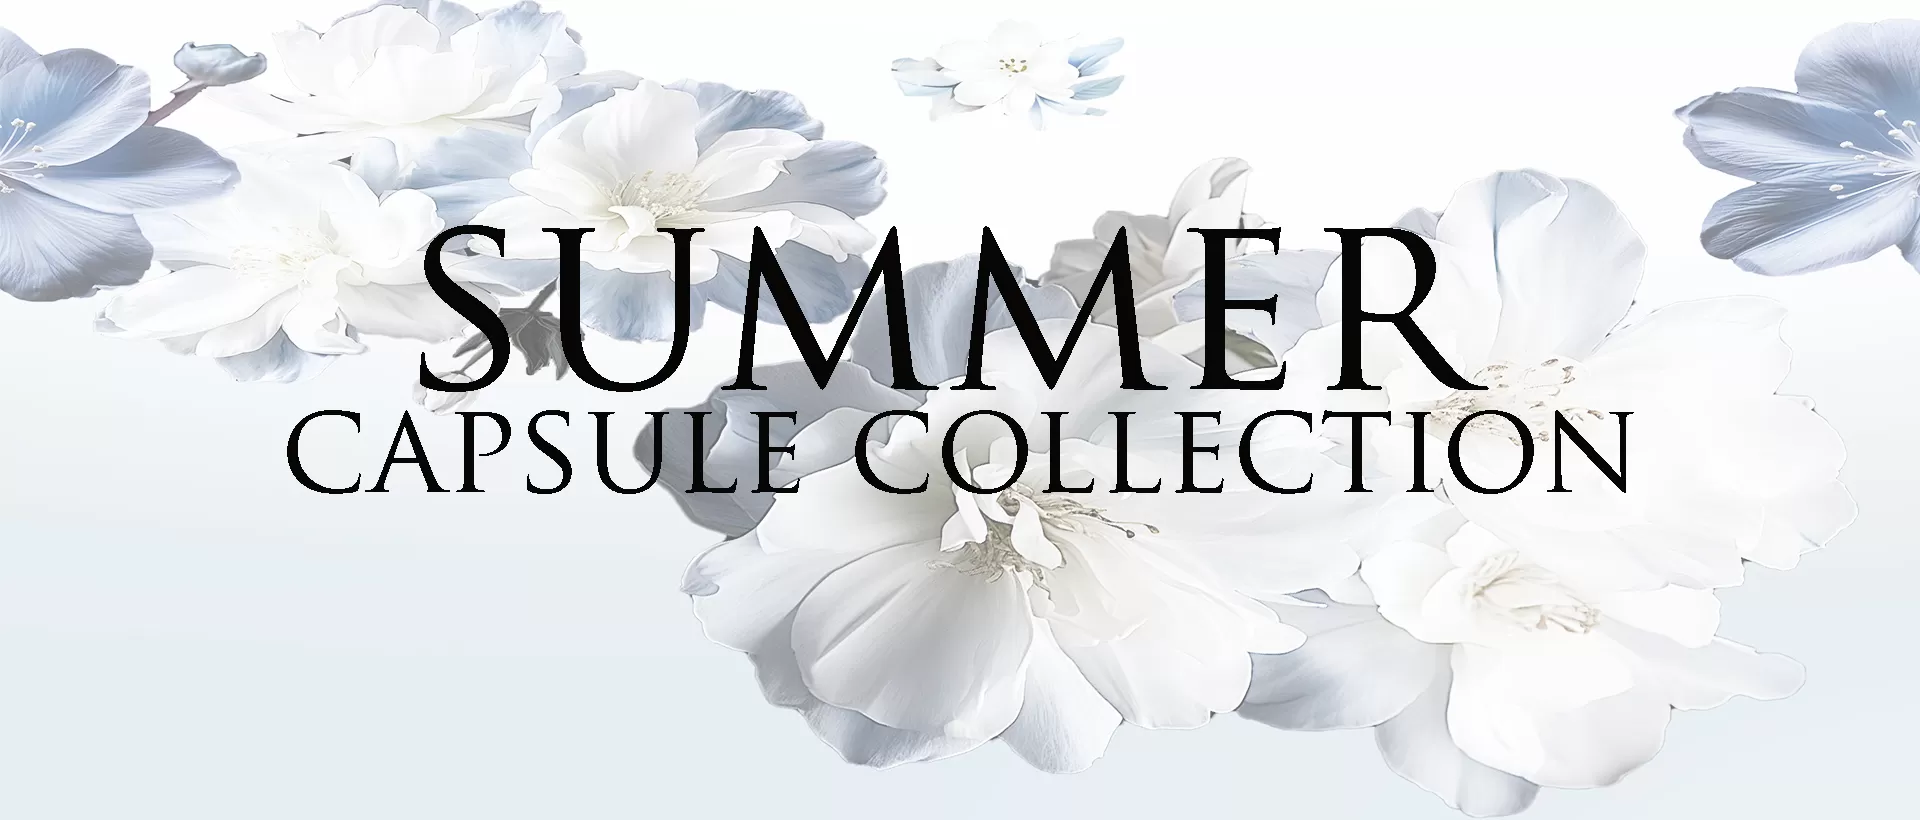 SUMMER CAPSULE COLLECTION